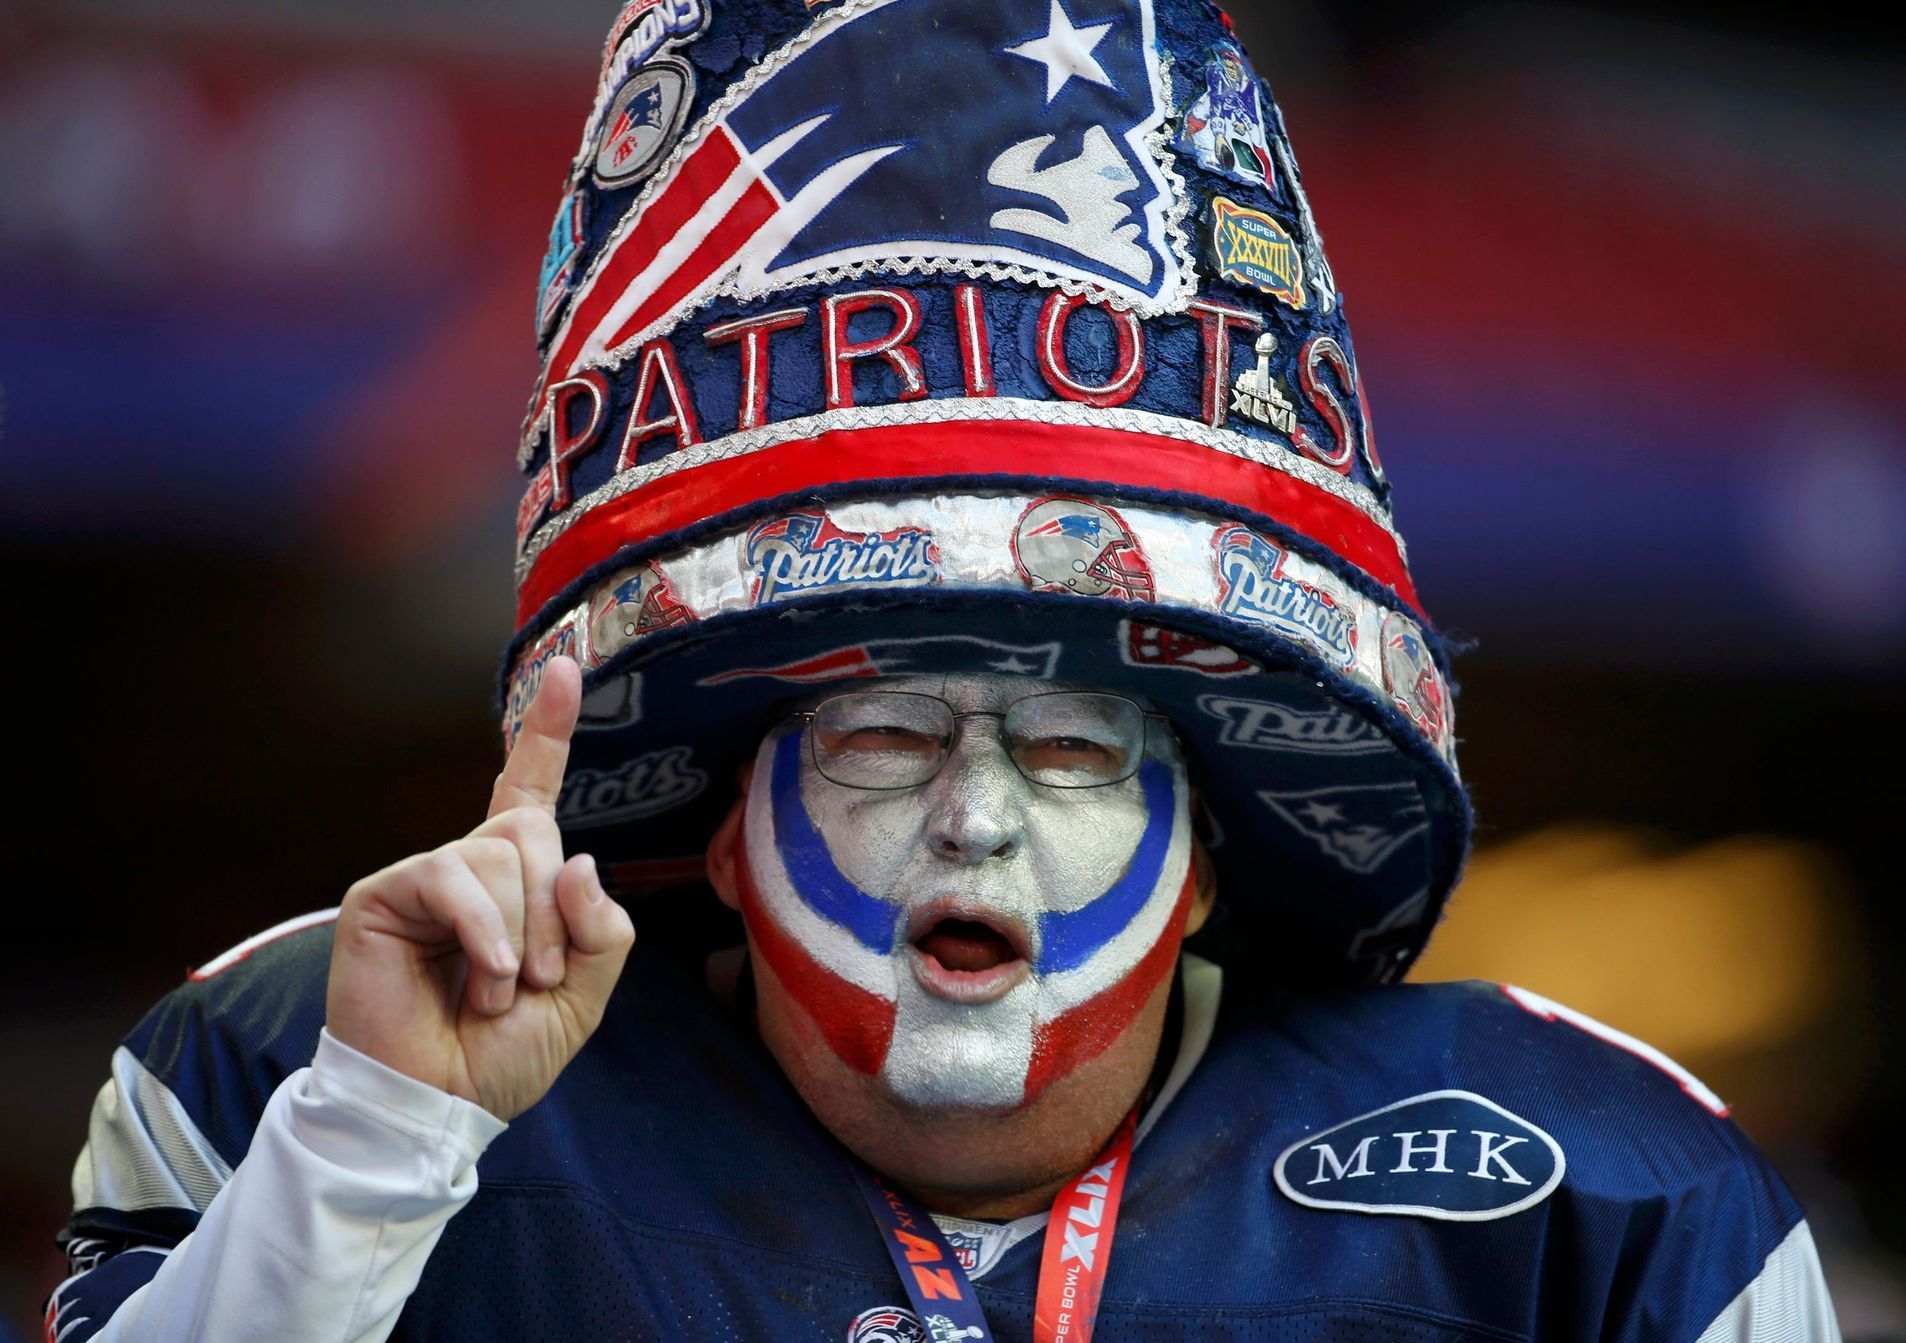 A New England Patriots fan celebrates while awaiting the start of the NFL Super Bowl XLIX football game against the Seattle Seahawks in Glendale